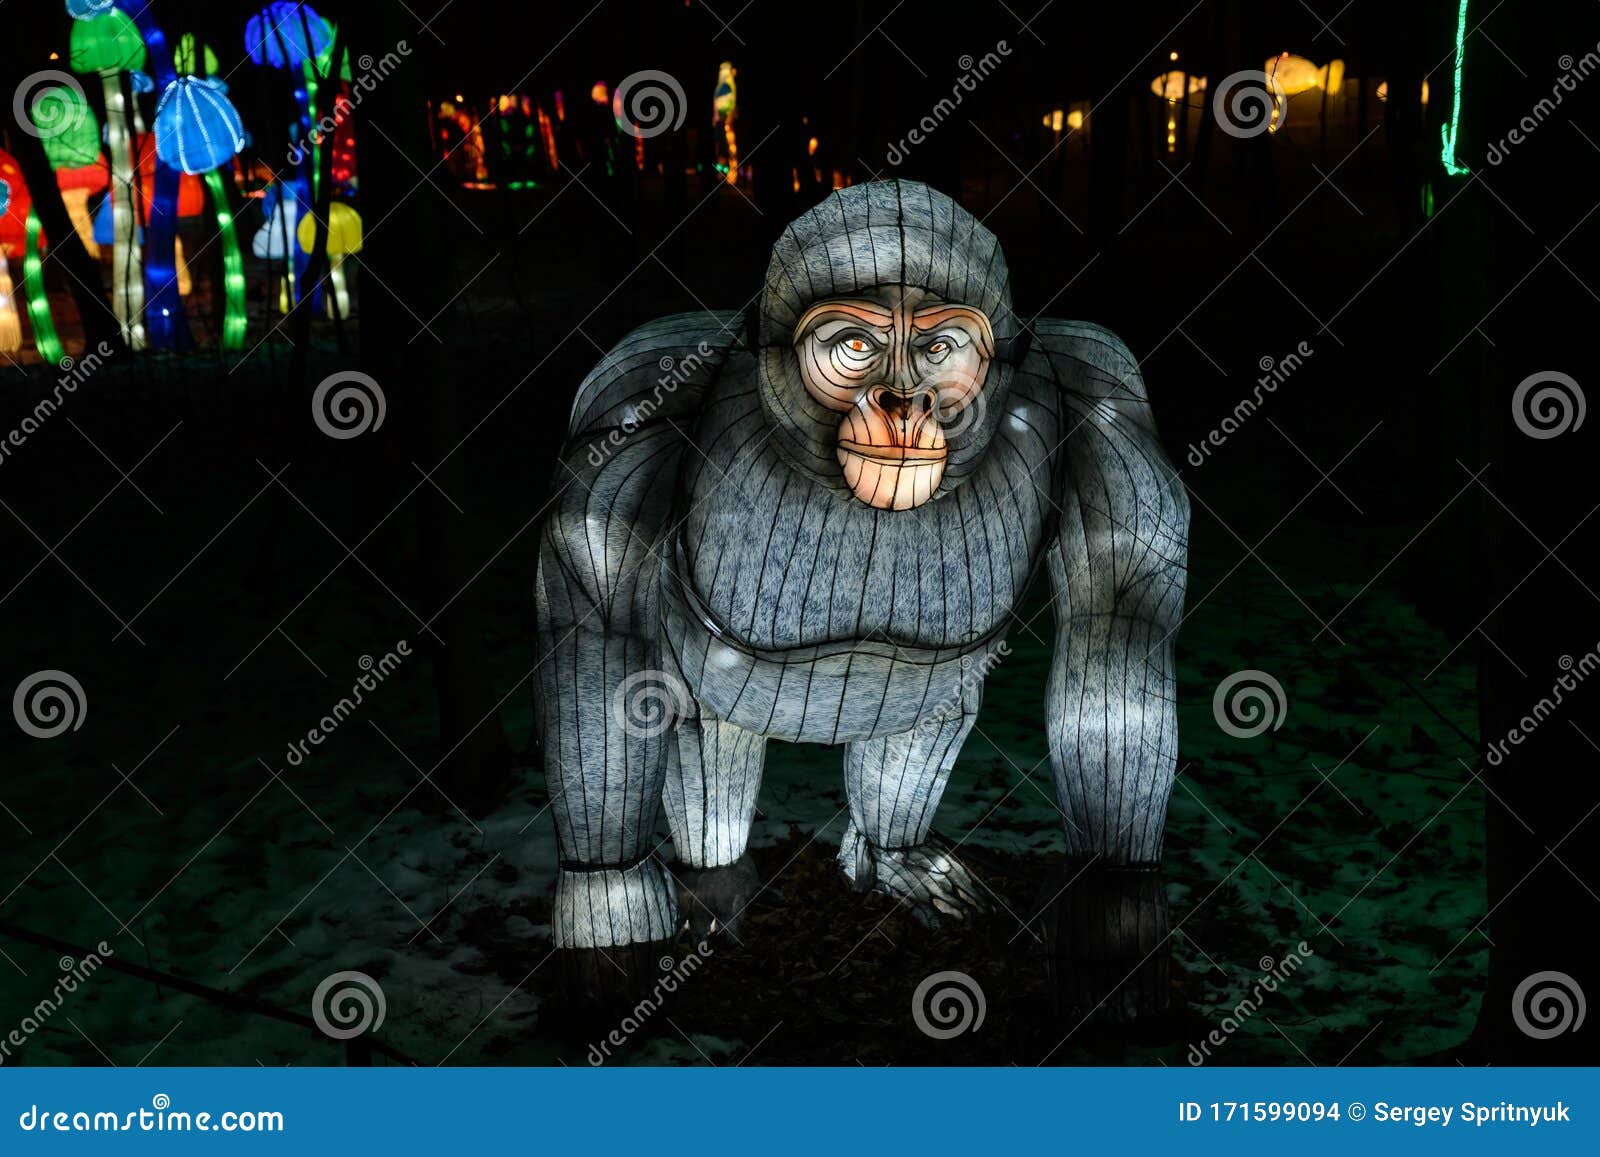 Chinese Festival Gorilla with on Black Background Editorial Stock Image - Image of ethnic, lampion: